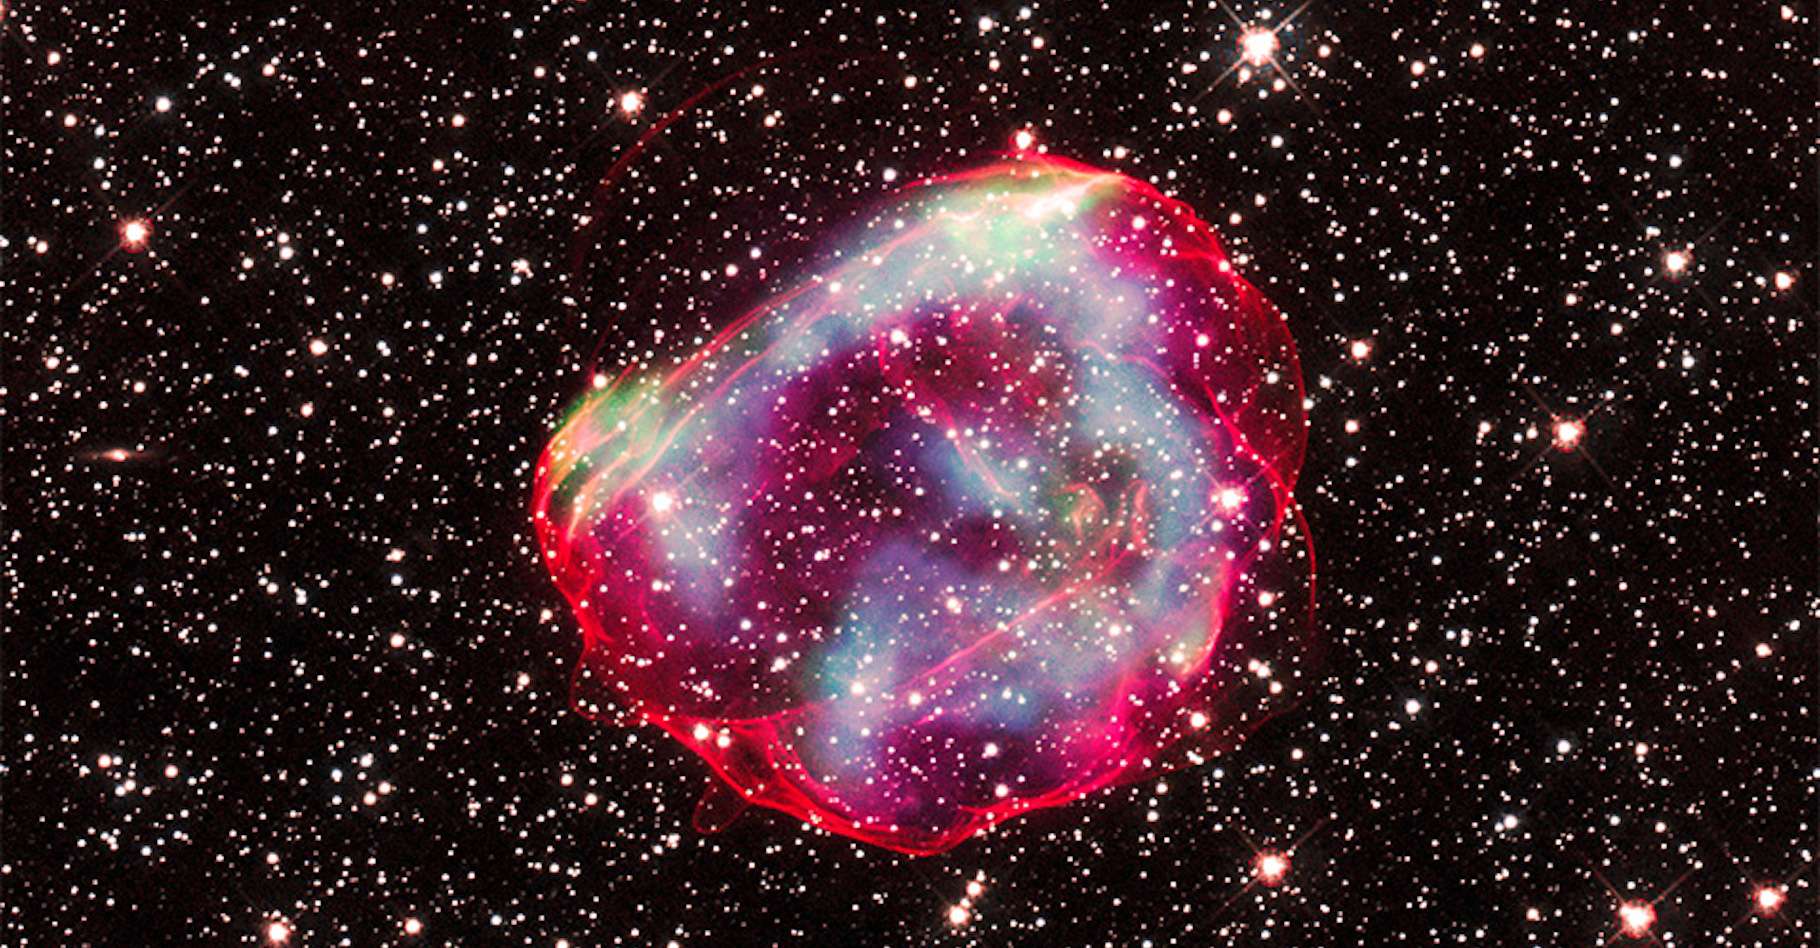 Astronomers have traveled back in time to the explosion of this star!